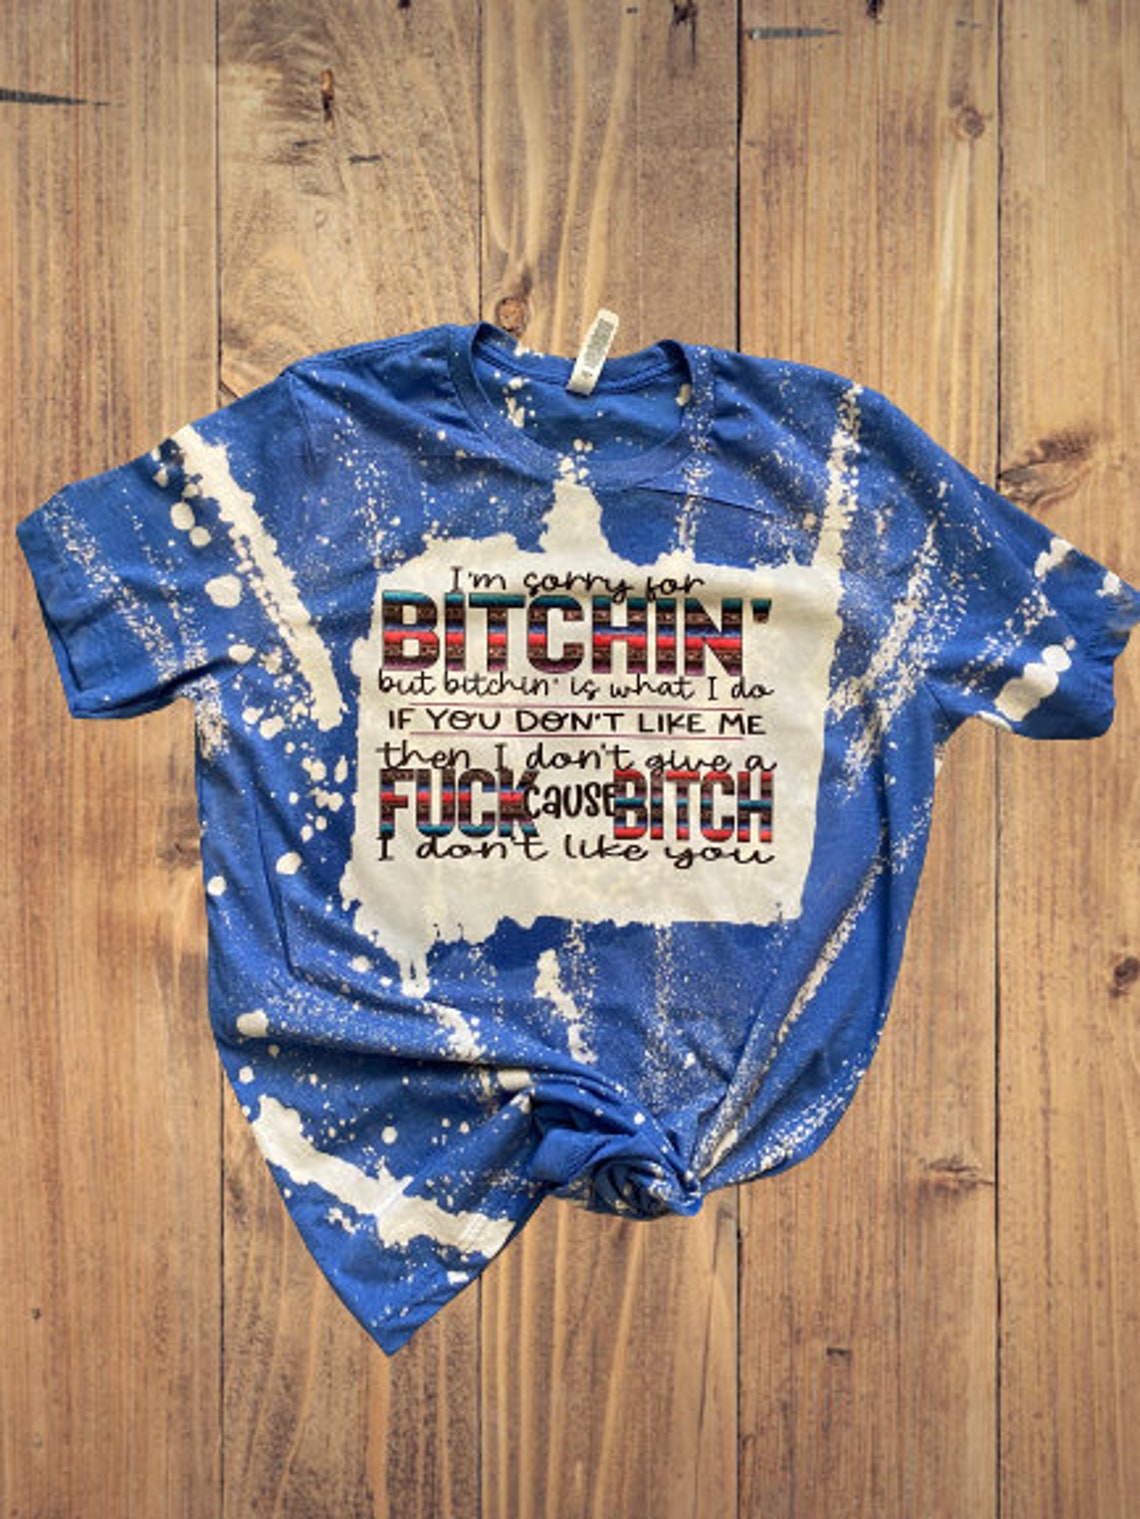 I'm Sorry For Bitchin' Bleached Tee / Funny Saying / | Etsy